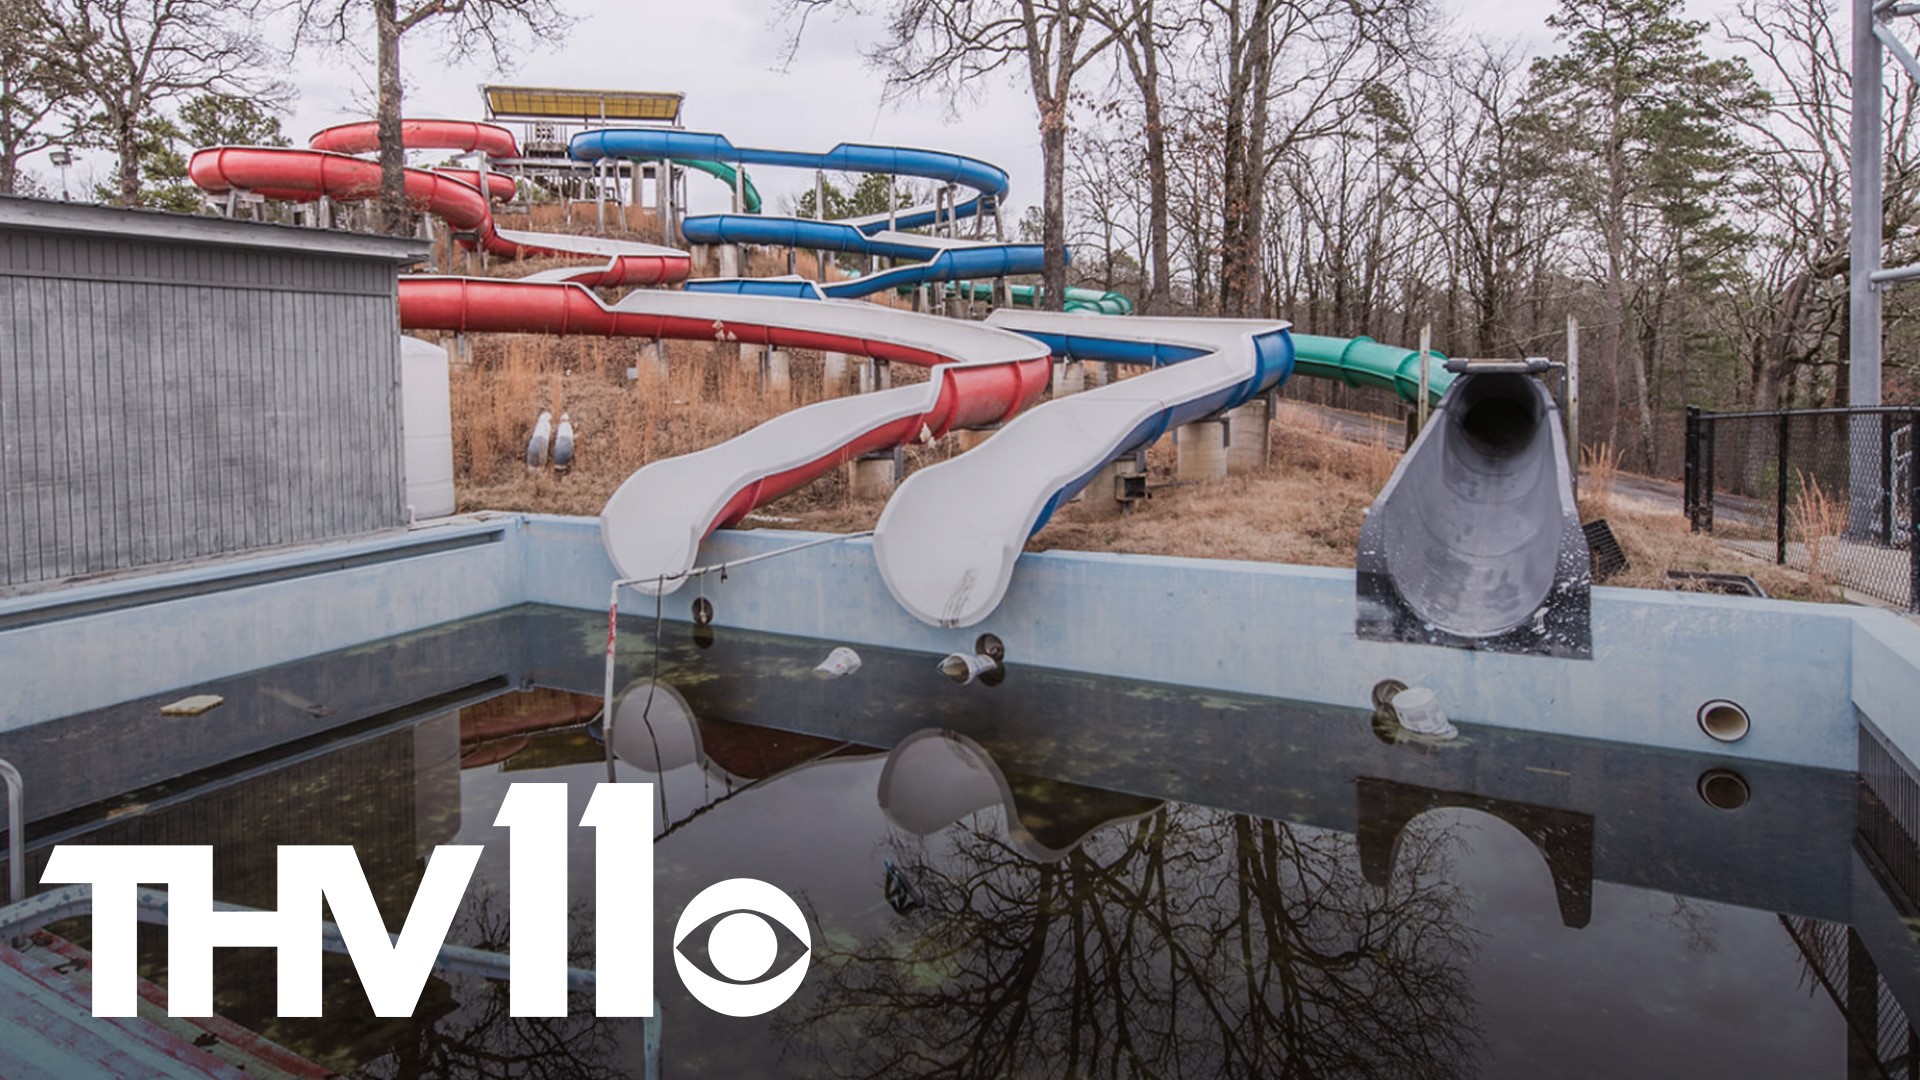 Wild River Country was a place families traveled from all across Arkansas to visit in the summer, but now it sits abandoned with the water slides ripped apart.